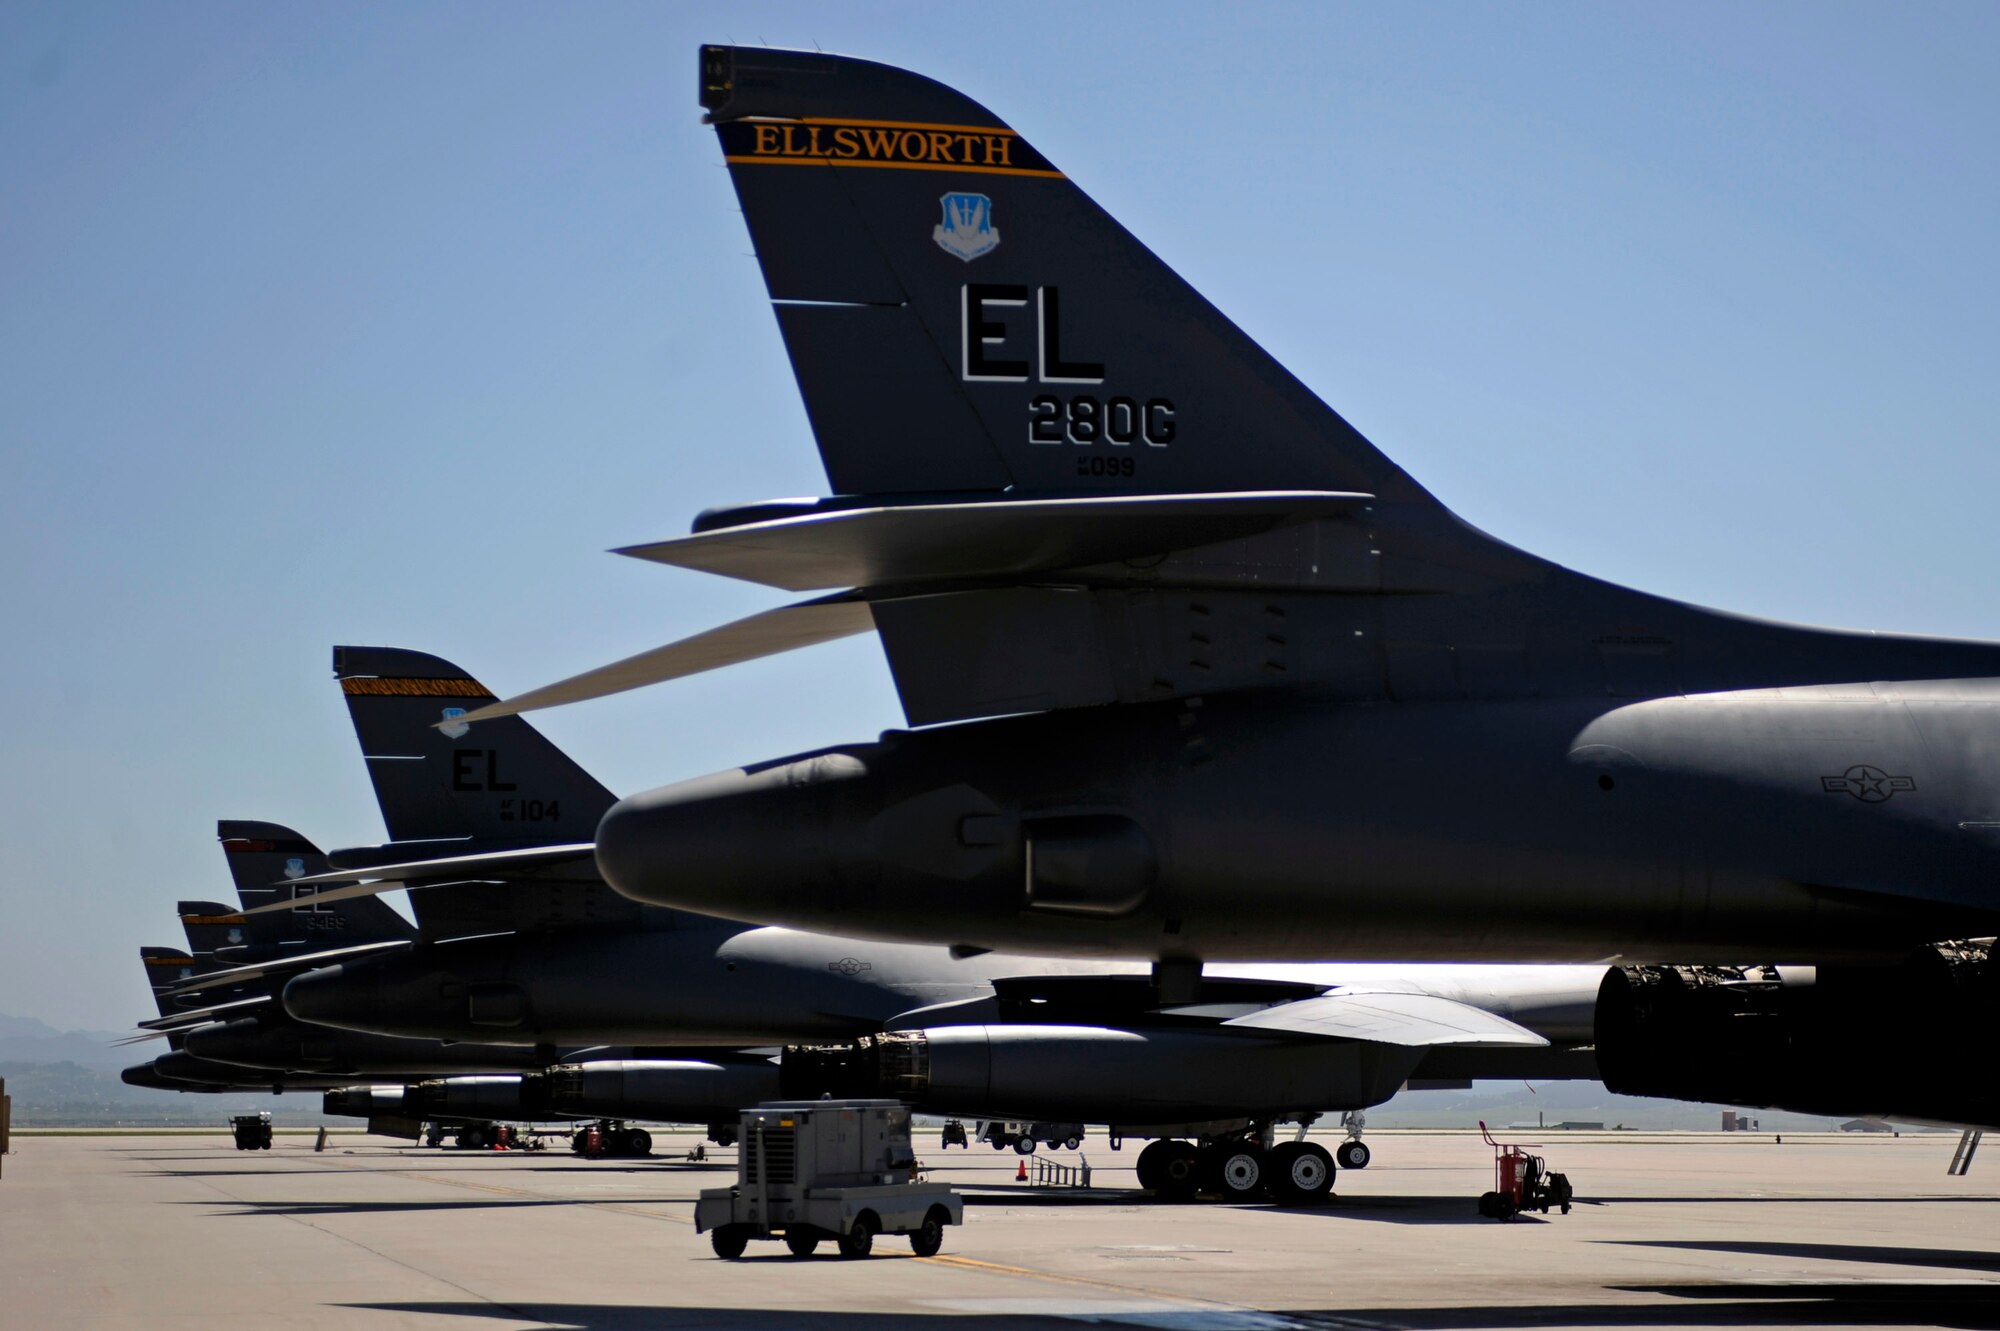 ELLSWORTH AIR FORCE BASE, S.D. – B-1B Lancers are parked on the flightline, June 30.  Carrying the largest payload of both guided and unguided weapons in the Air Force inventory, the multi-mission B-1 is the backbone of America’s long-range bomber force. (U.S. Air Force photo/Airman 1st Class Matthew Flynn)